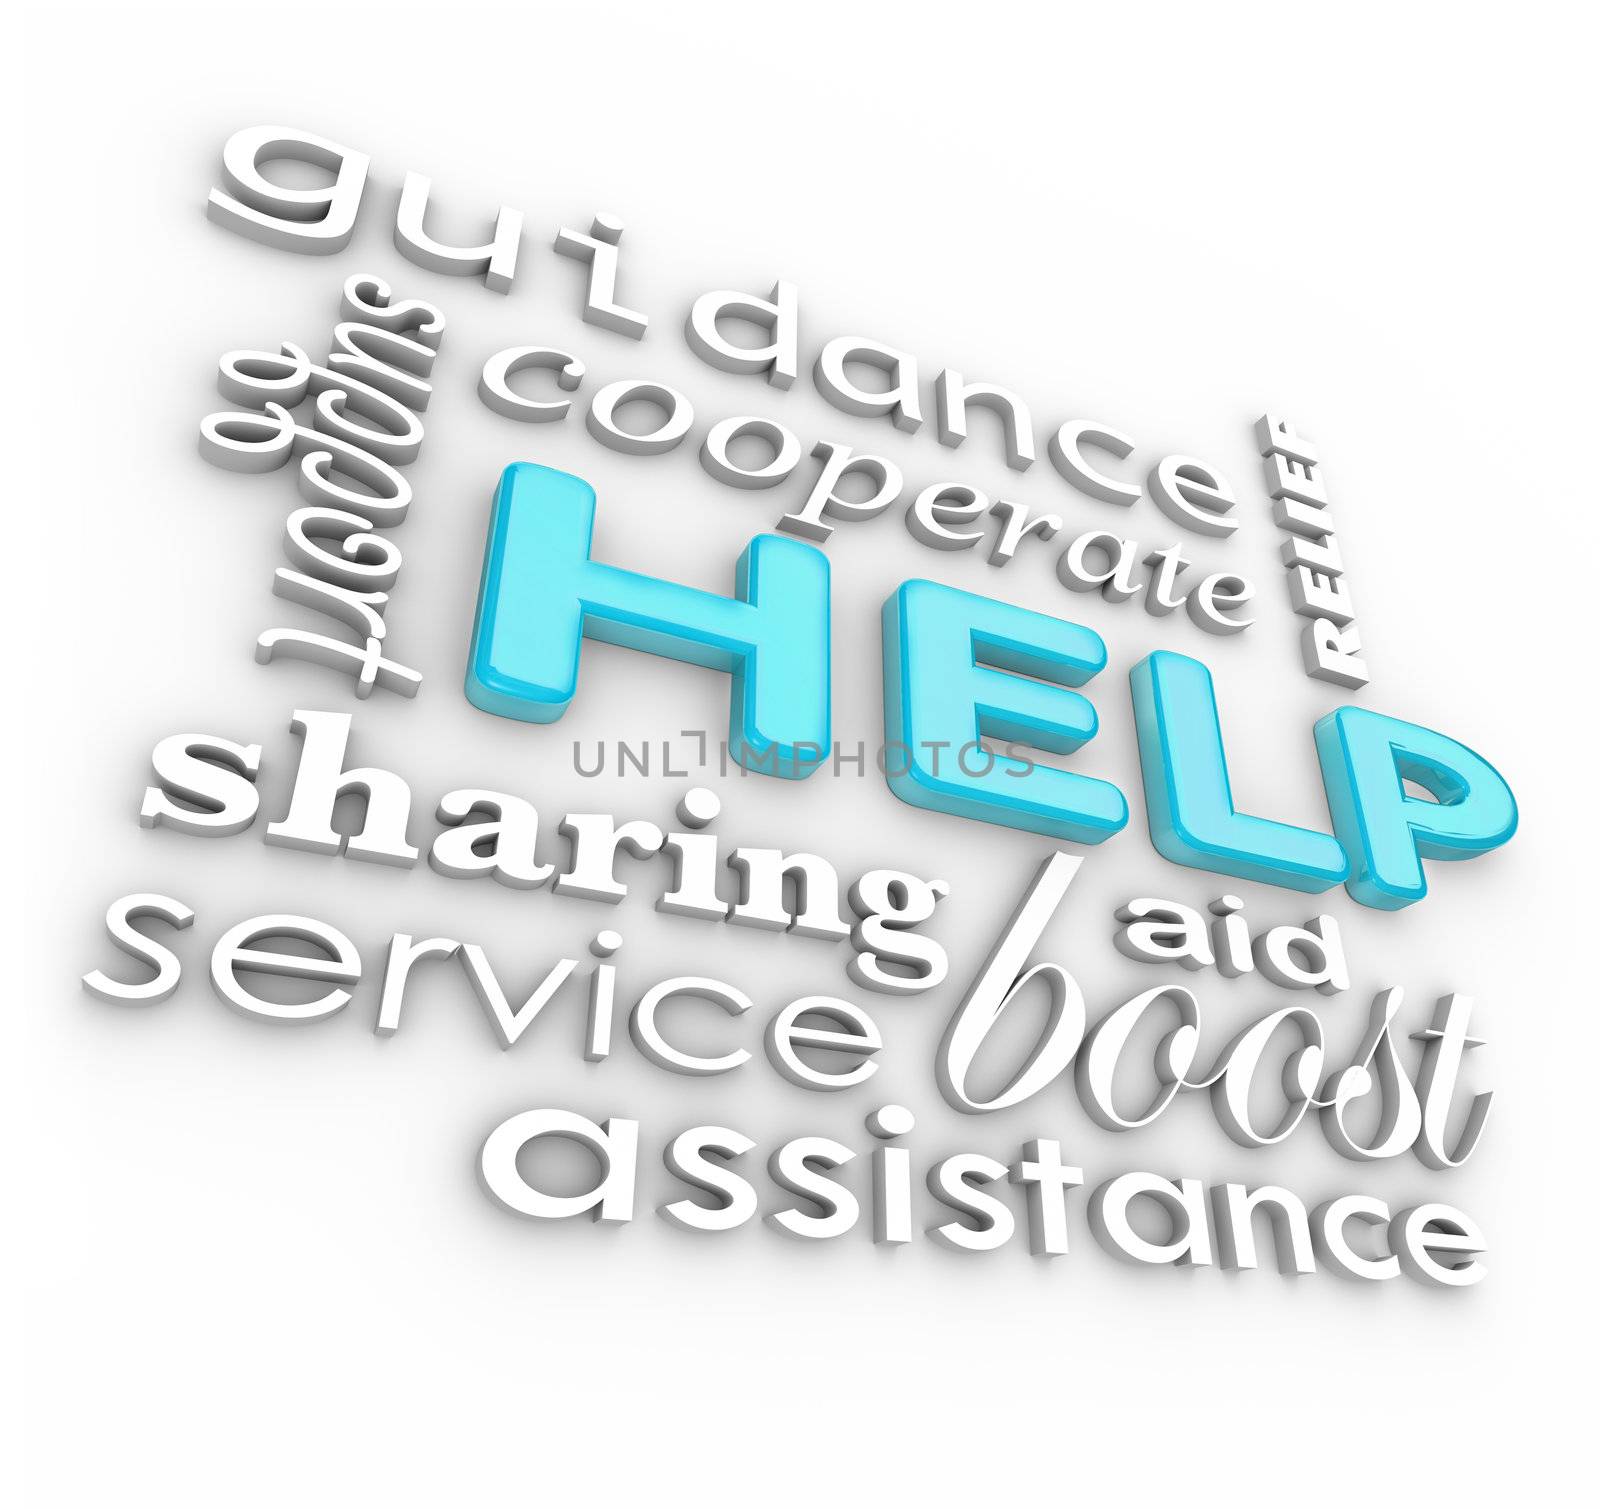 The word Help and many related words such as service, support, aid, cooperate, boost, assistance, guidance and more as a background of encouraging phrases 